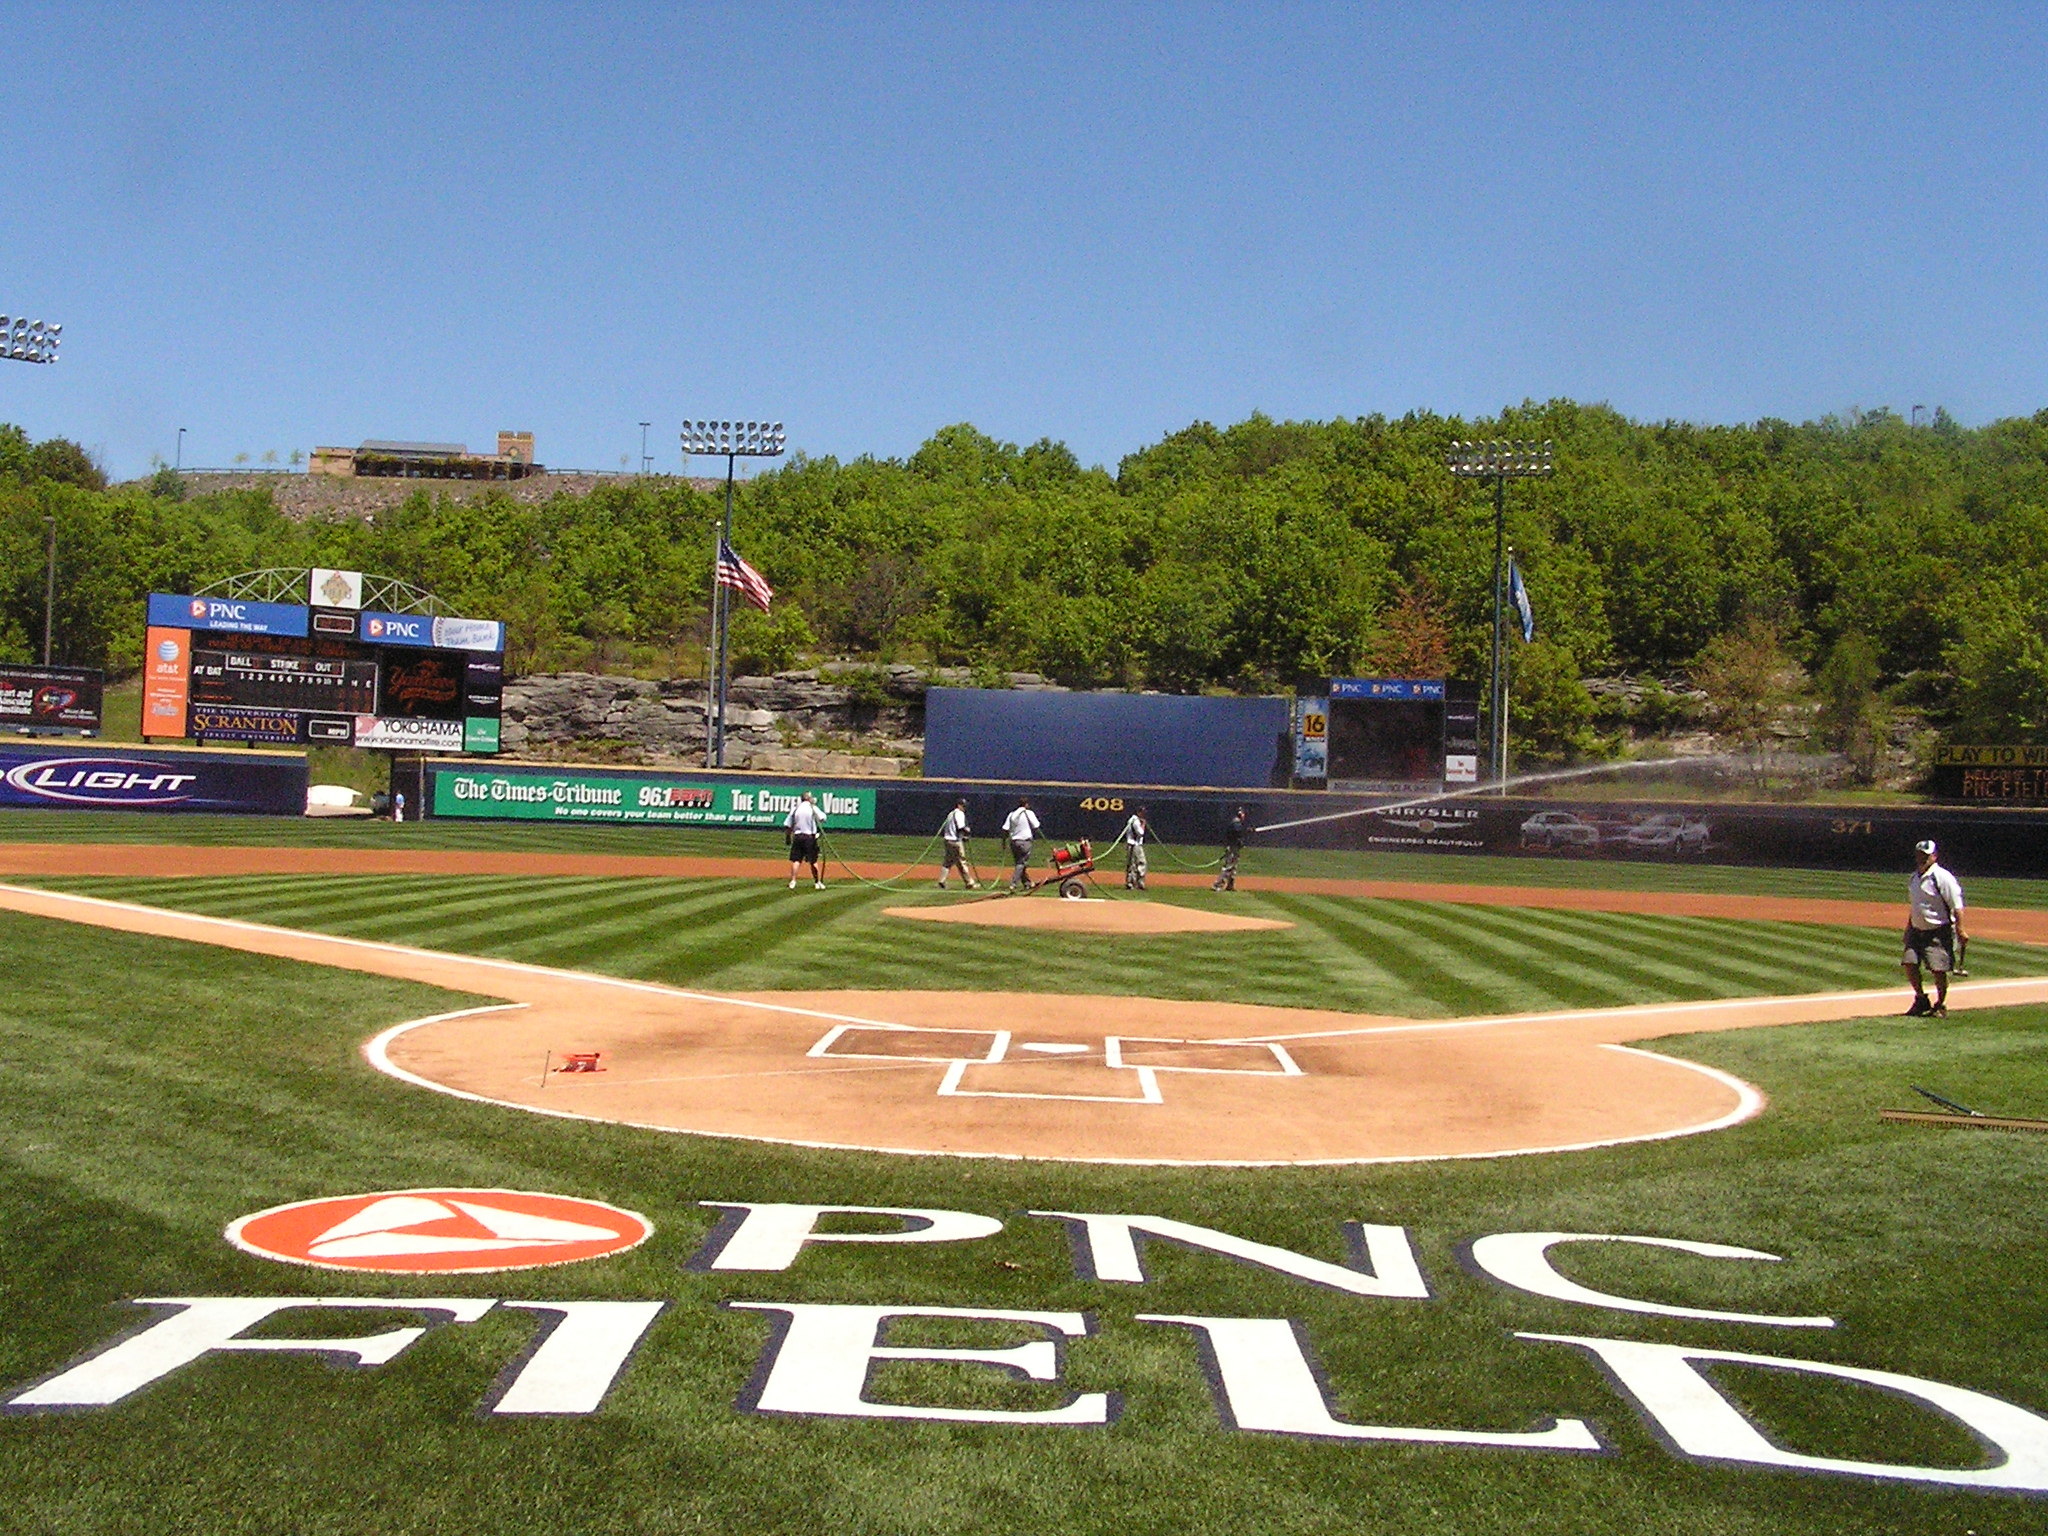 From behind Home Plate -PNC Field, Moosic